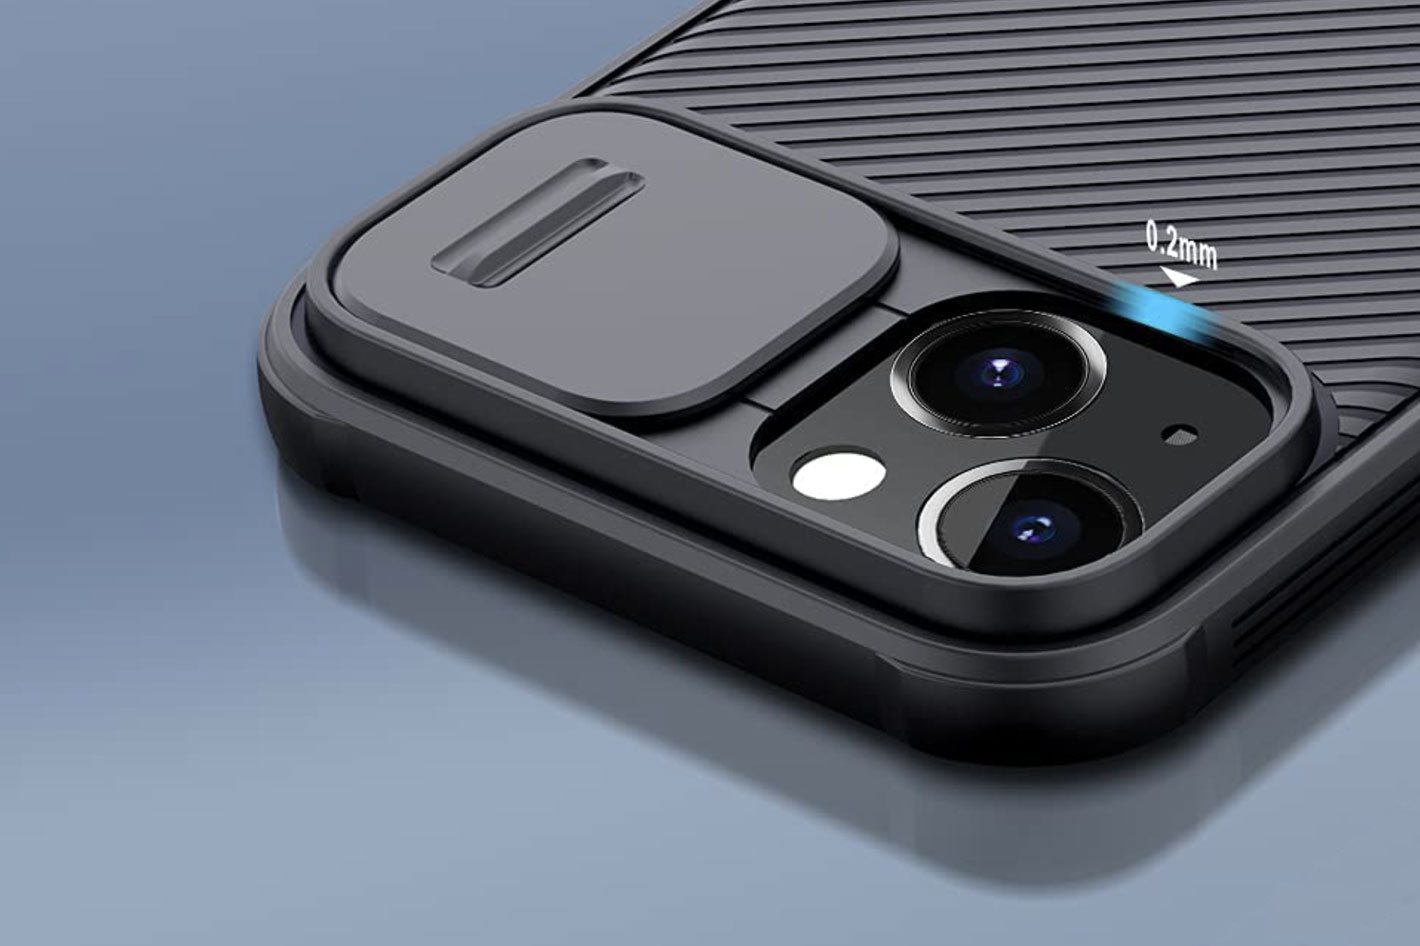 How to protect the camera lens on your smartphone